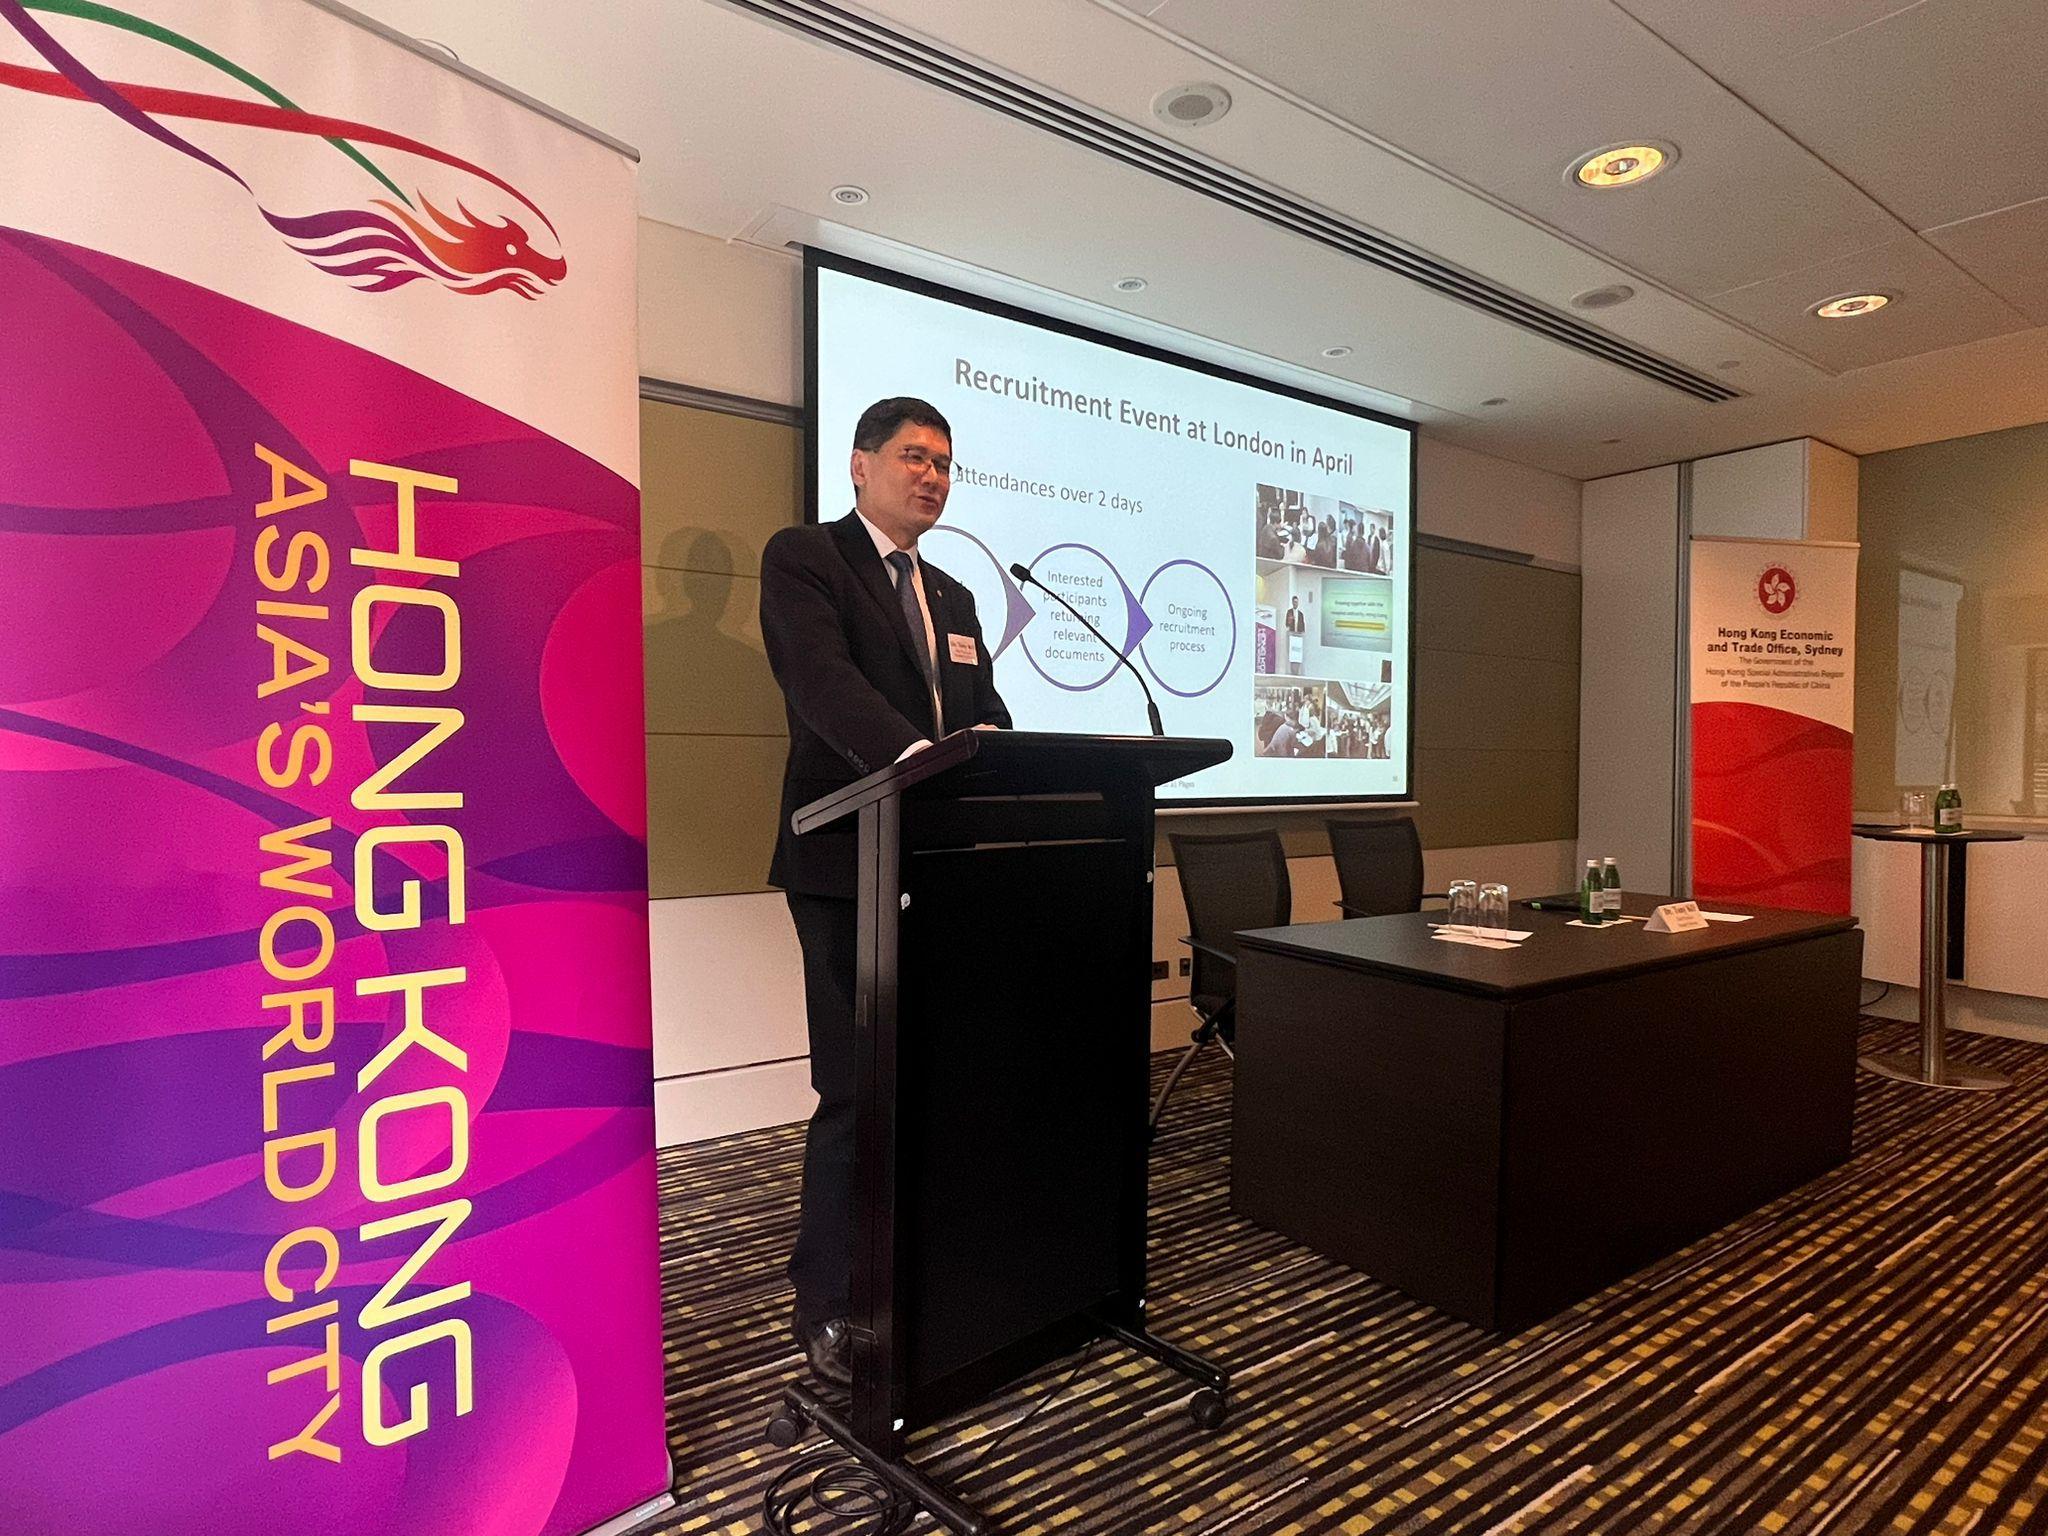 The Hospital Authority Chief Executive, Dr Tony Ko, introduced the public healthcare service of Hong Kong to the medical students and medical practitioners at the recruitment event in Sydney, Australia, today (June 3) and invited them to develop their career in Hong Kong.